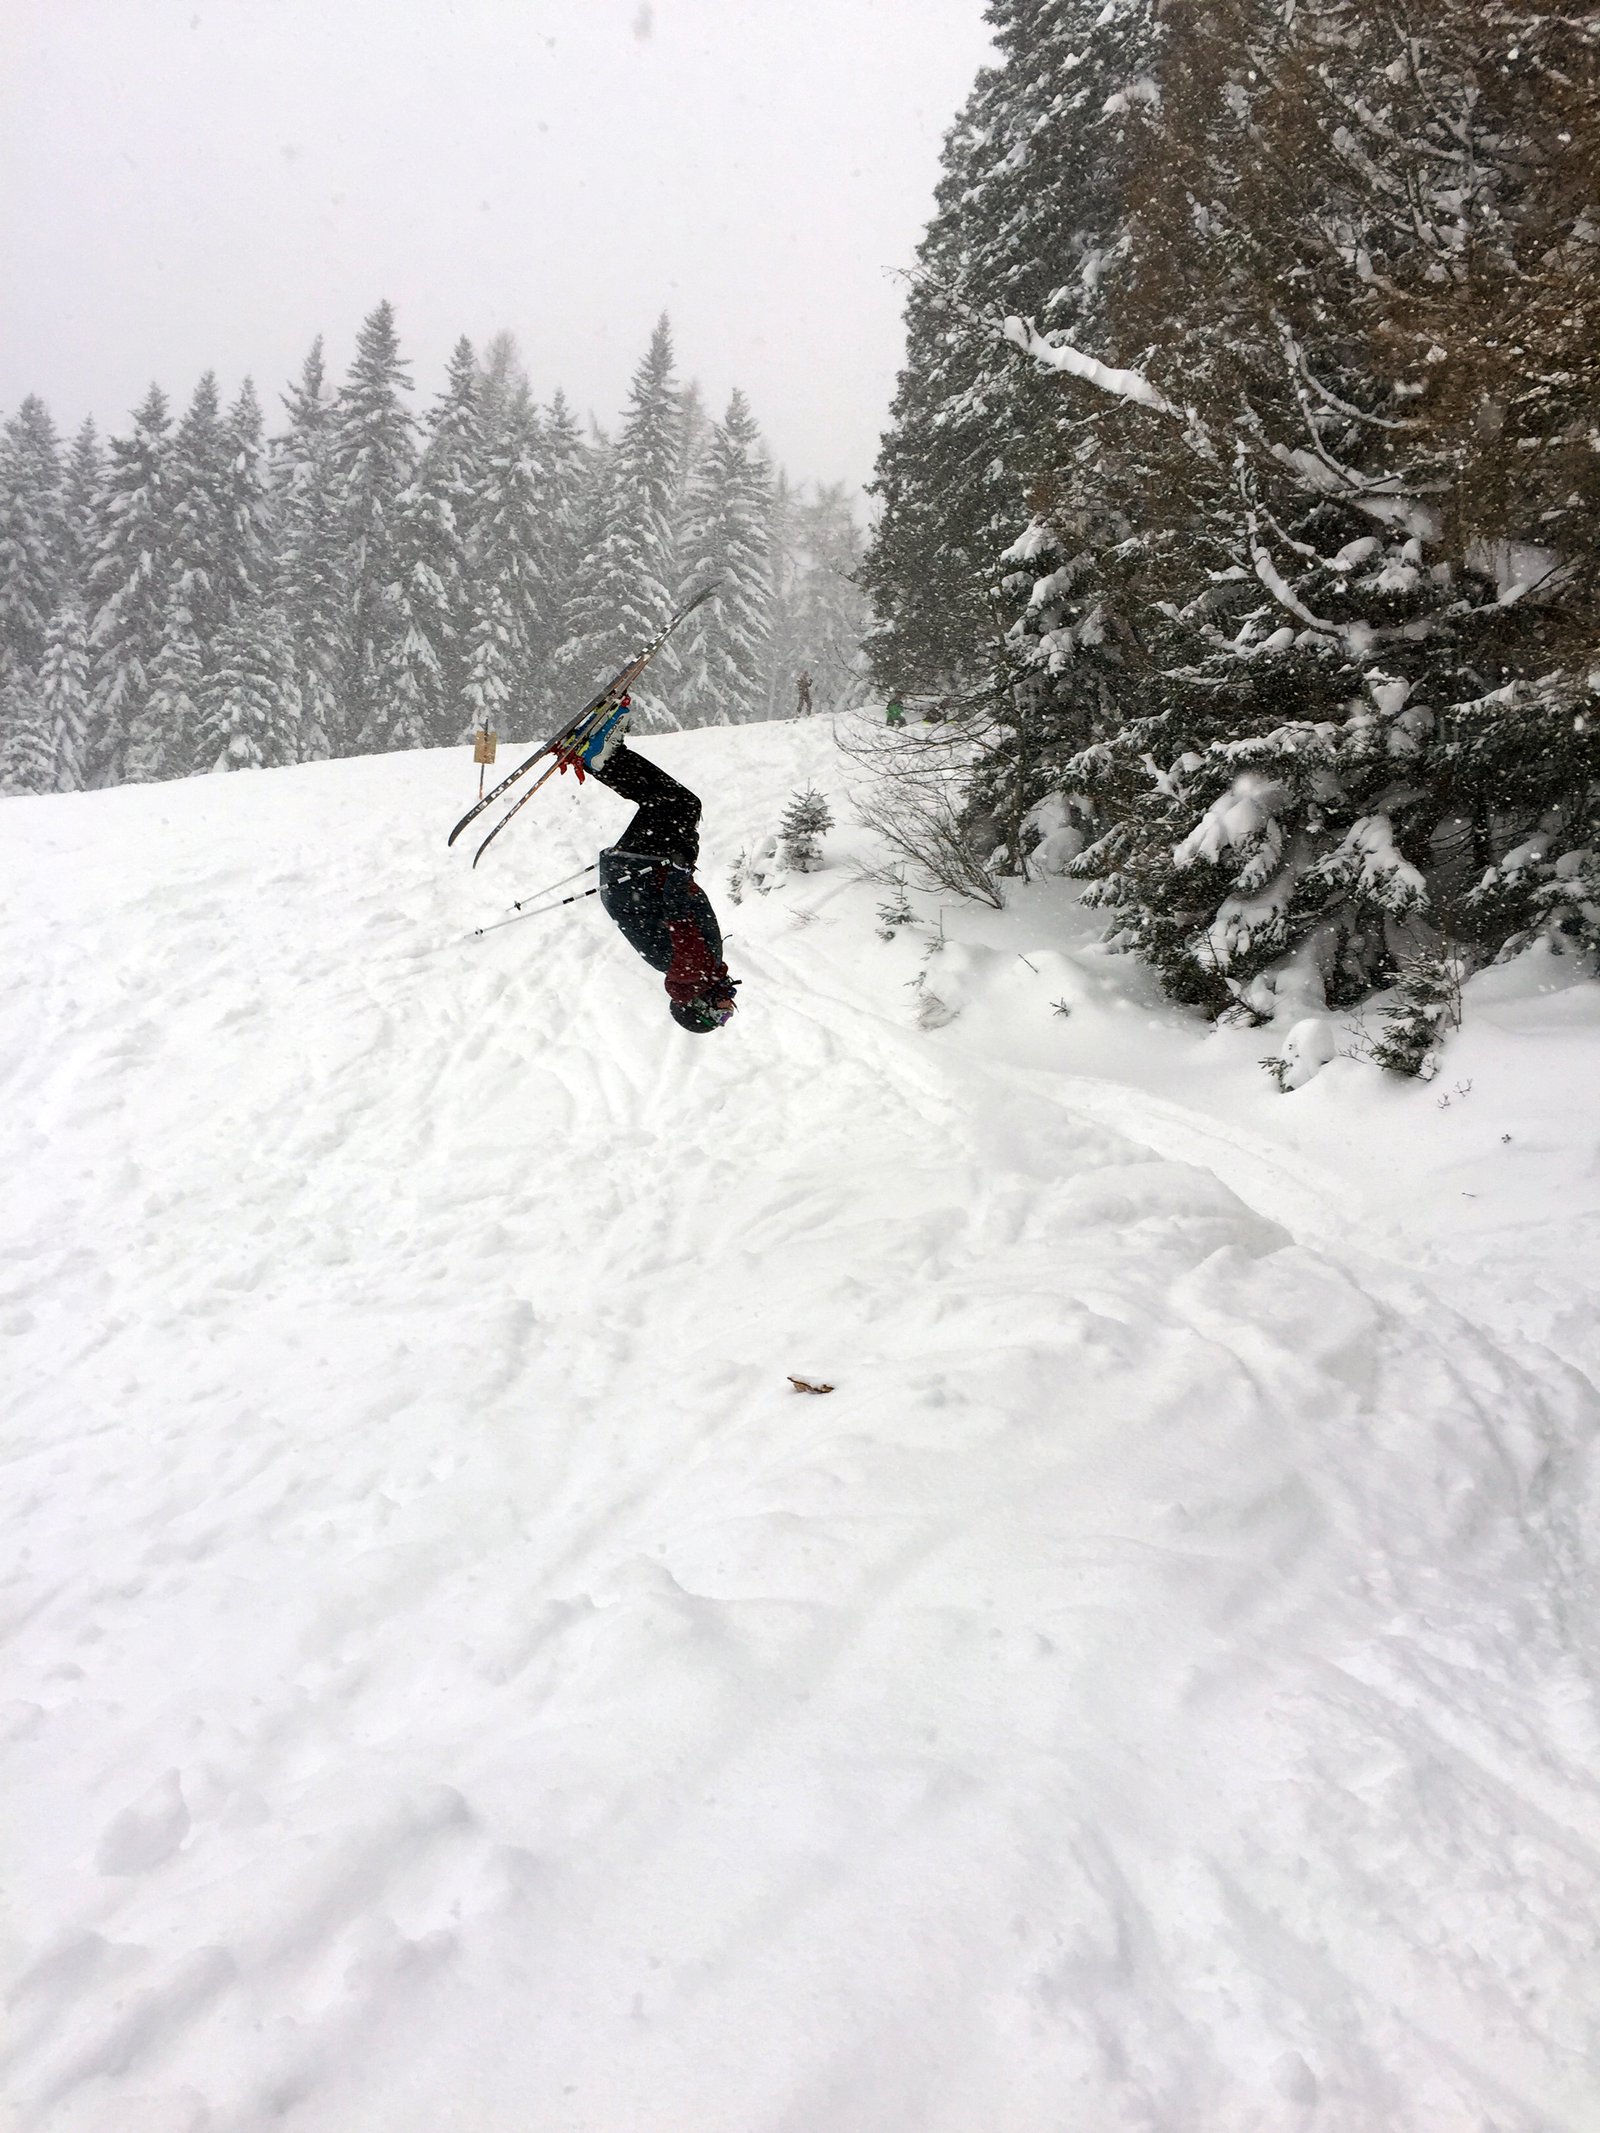 Small Backflip in the fresh snow *-*